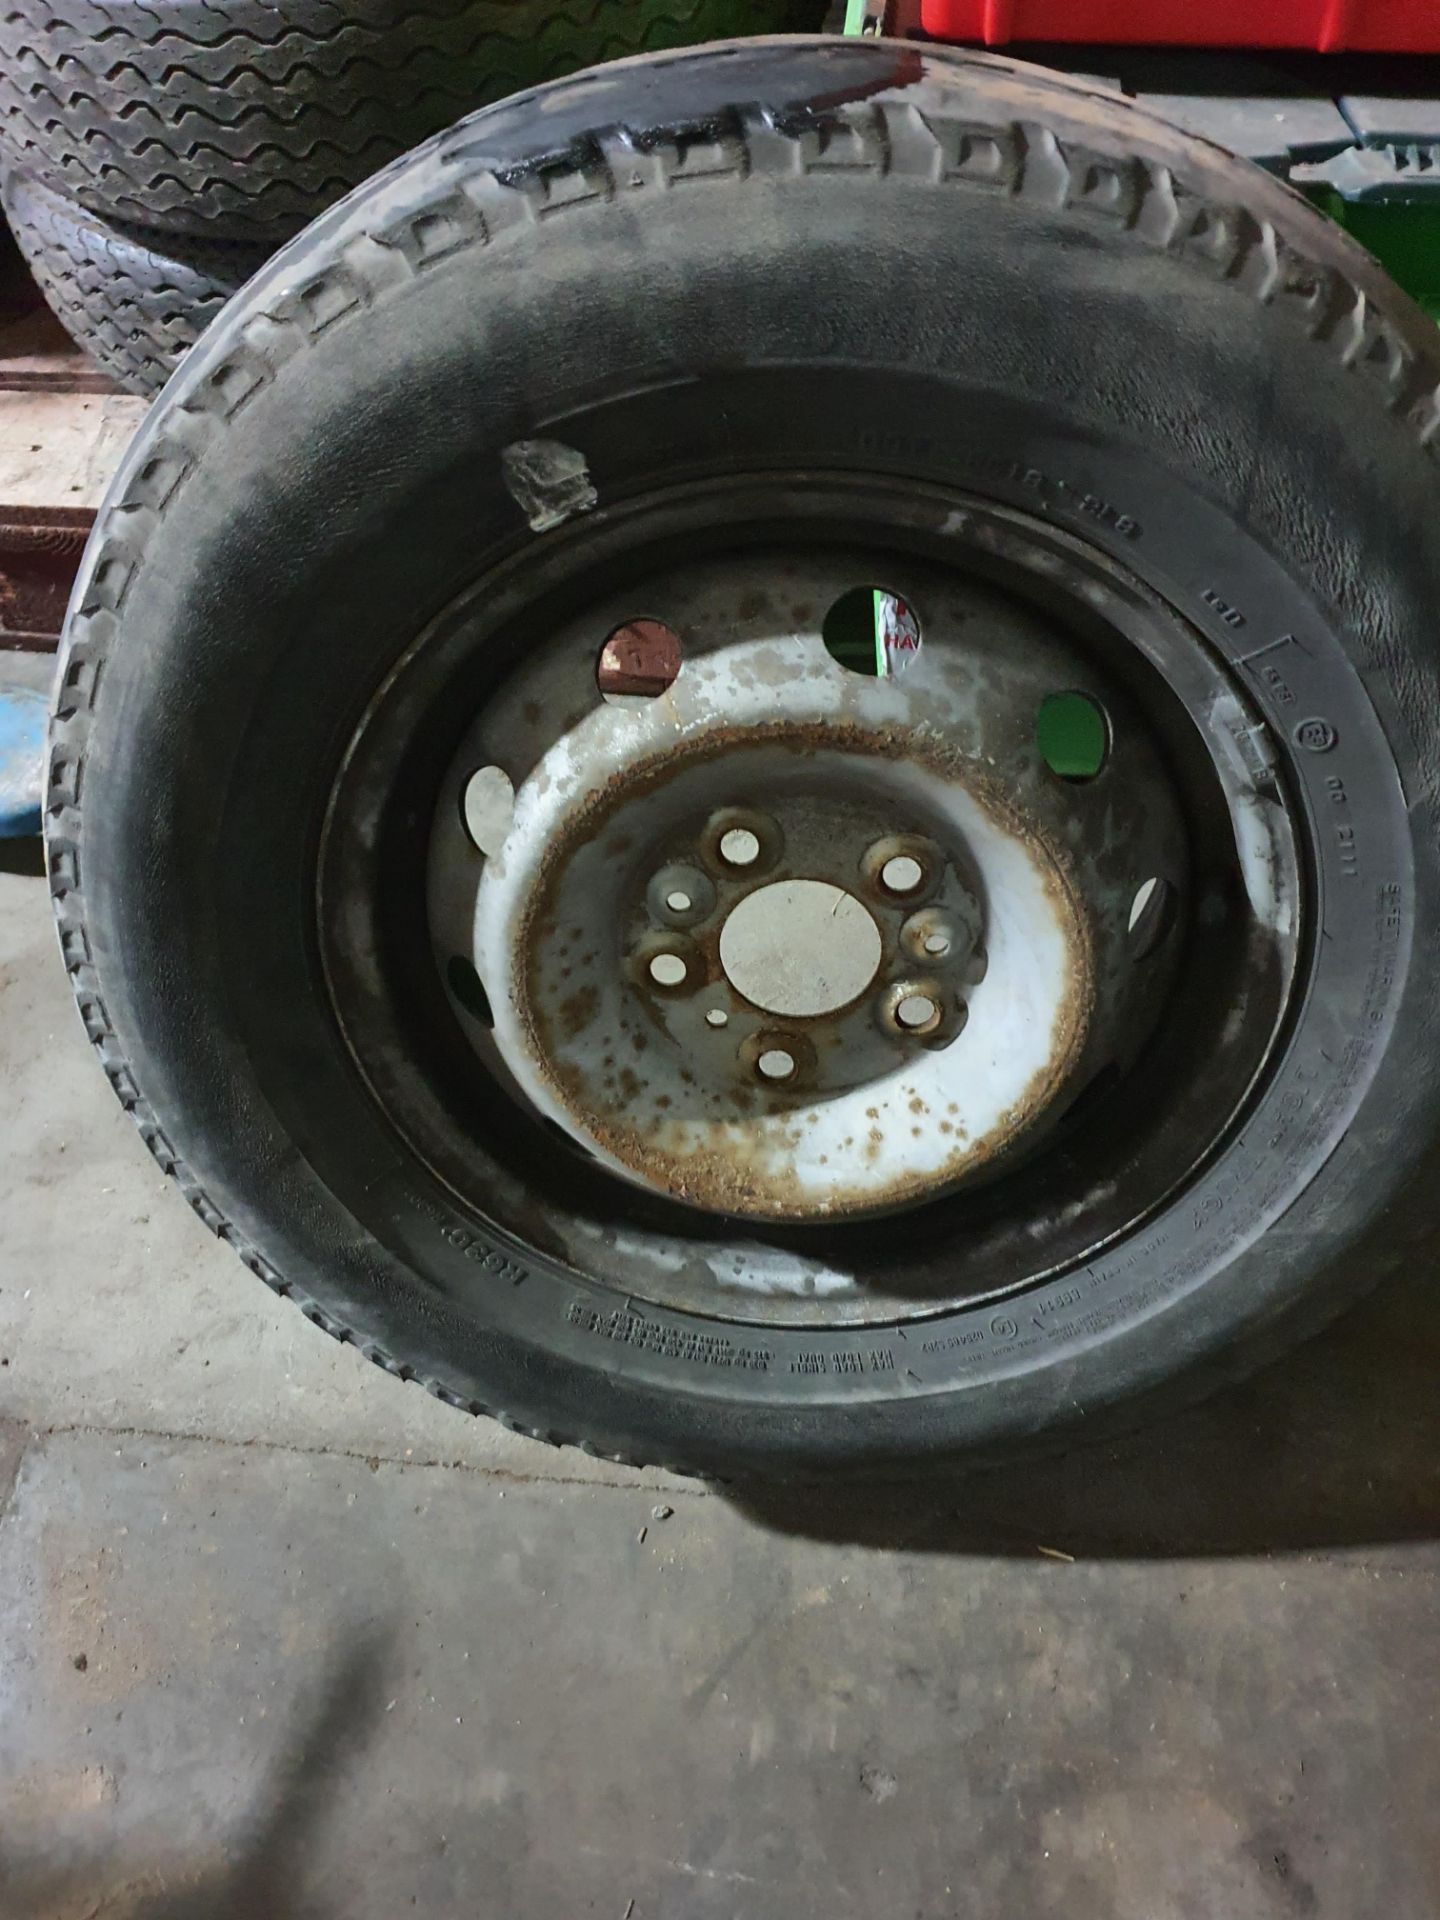 VW CRAFTER VAN WHEEL, TYRE IS FLAT, HAS A PUNCTURE - Image 2 of 3